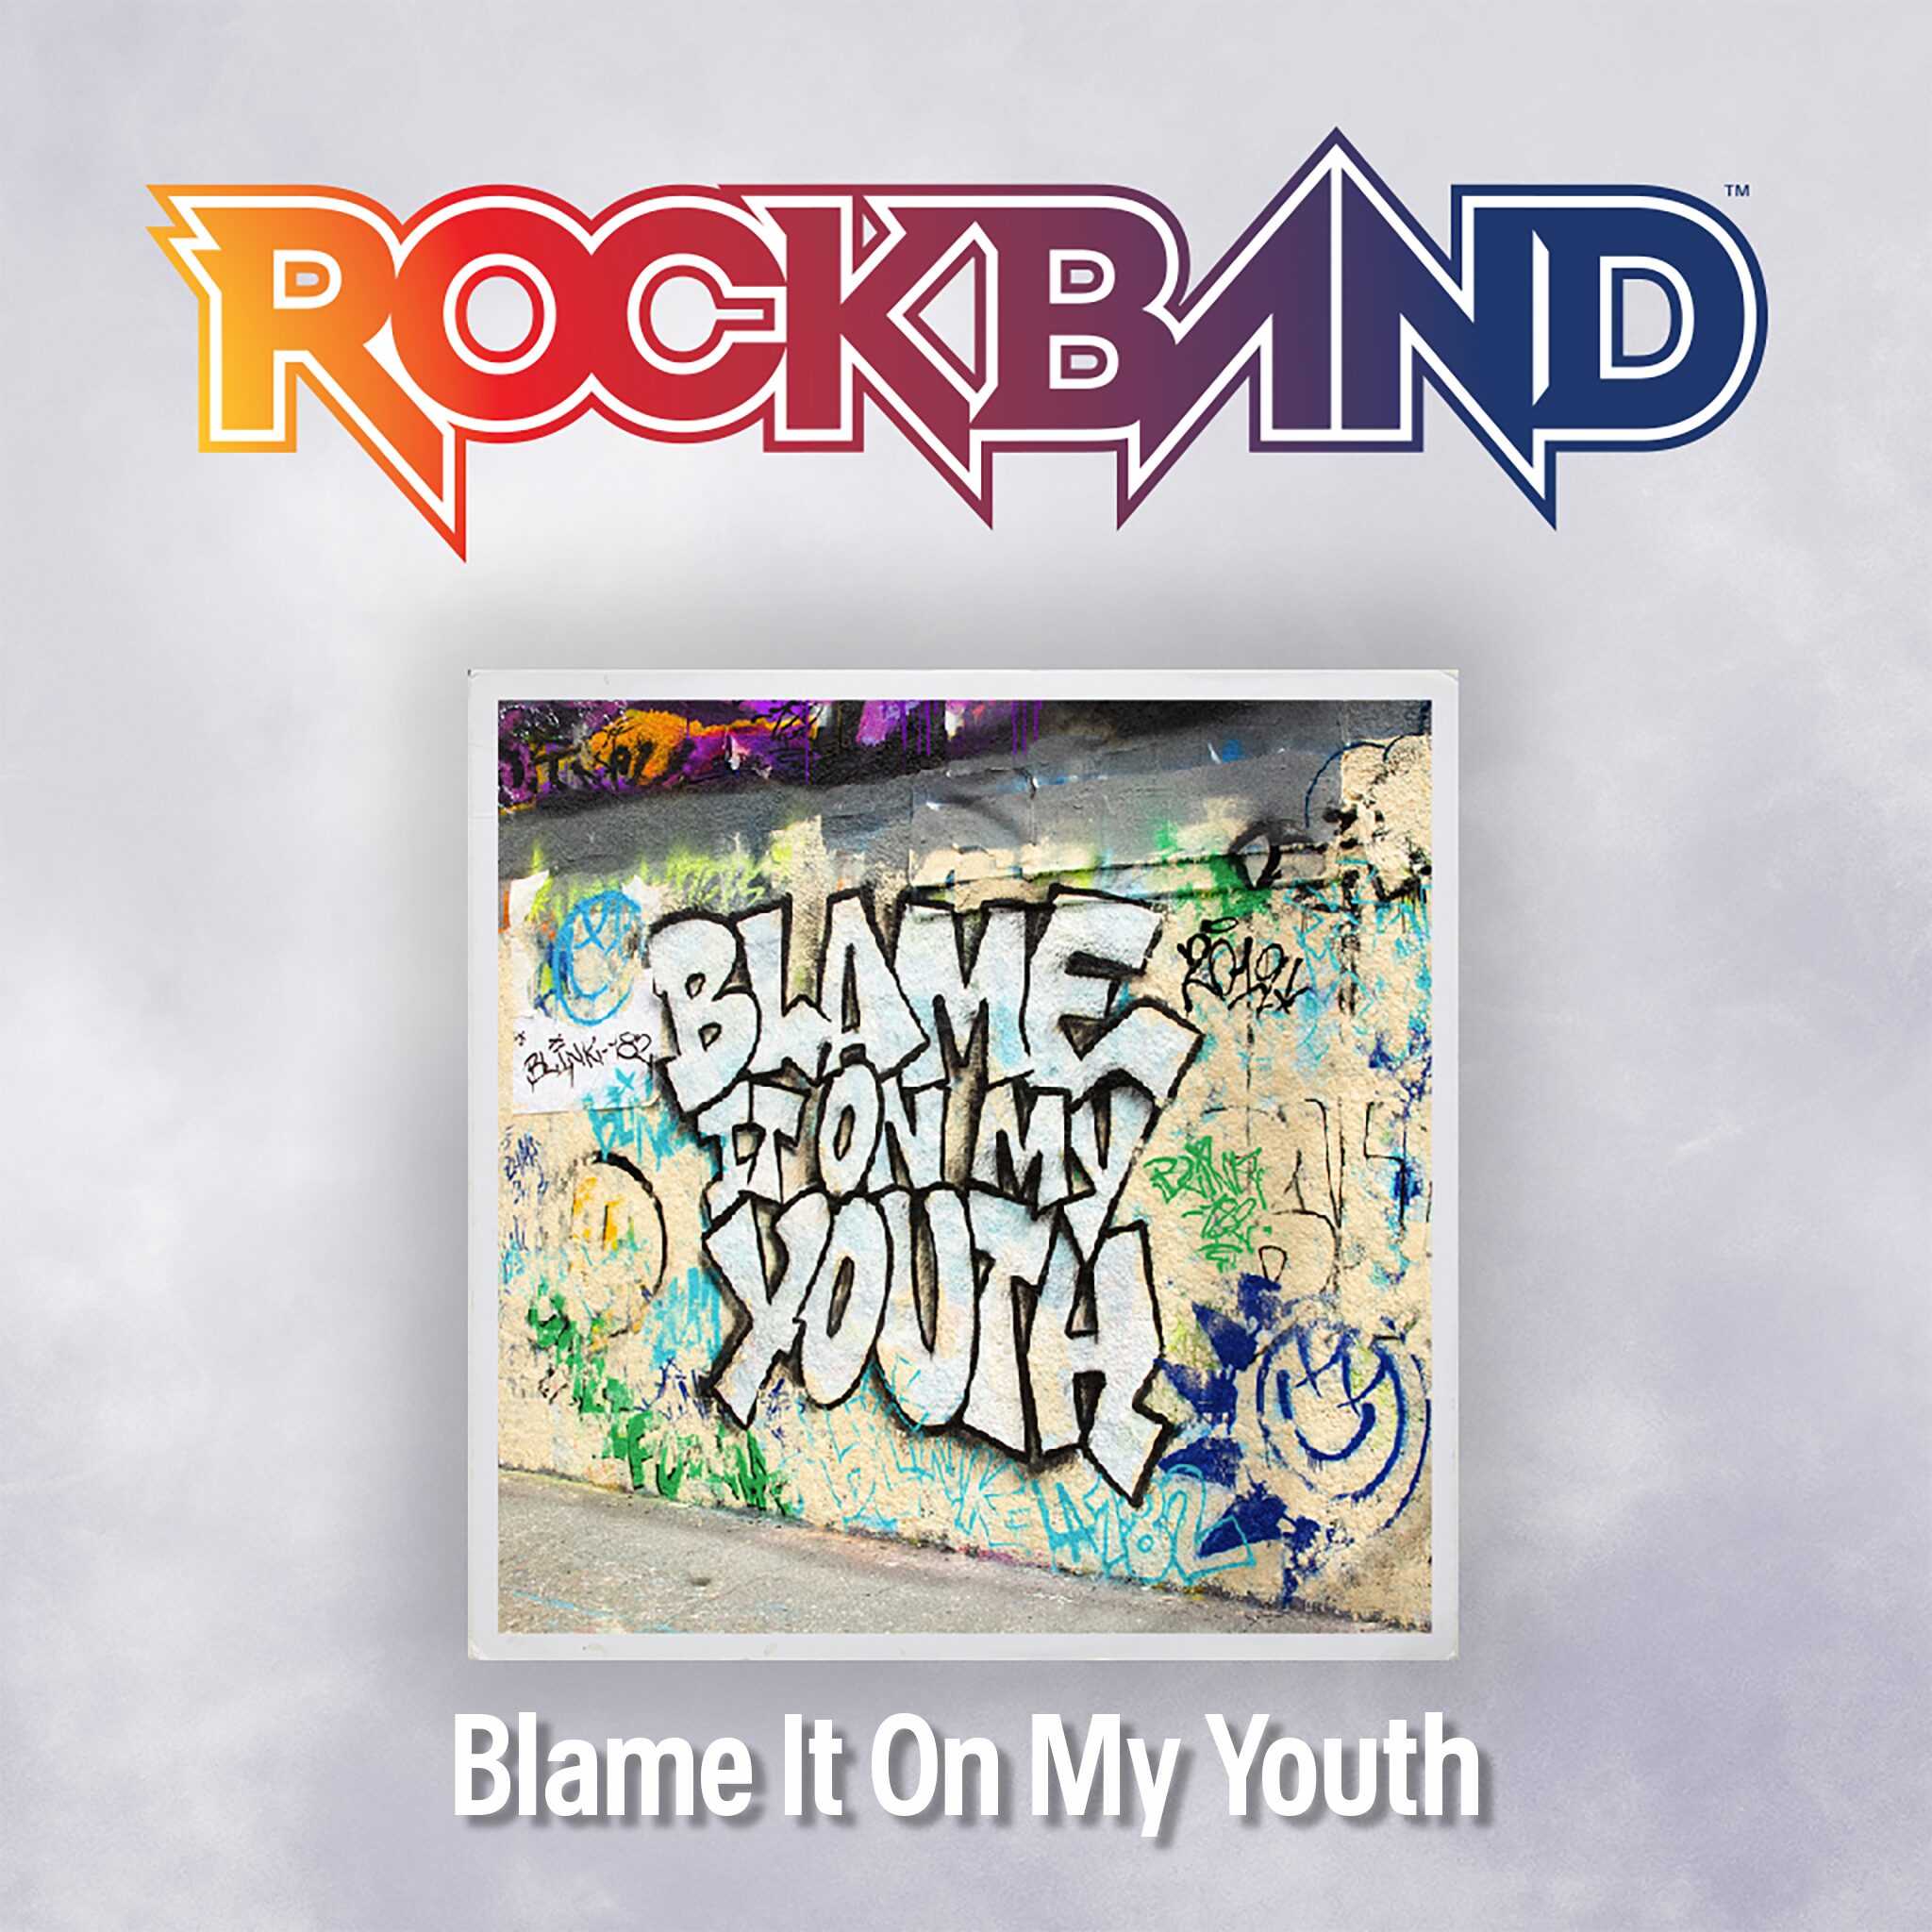 'Blame It On My Youth' - Blink-182